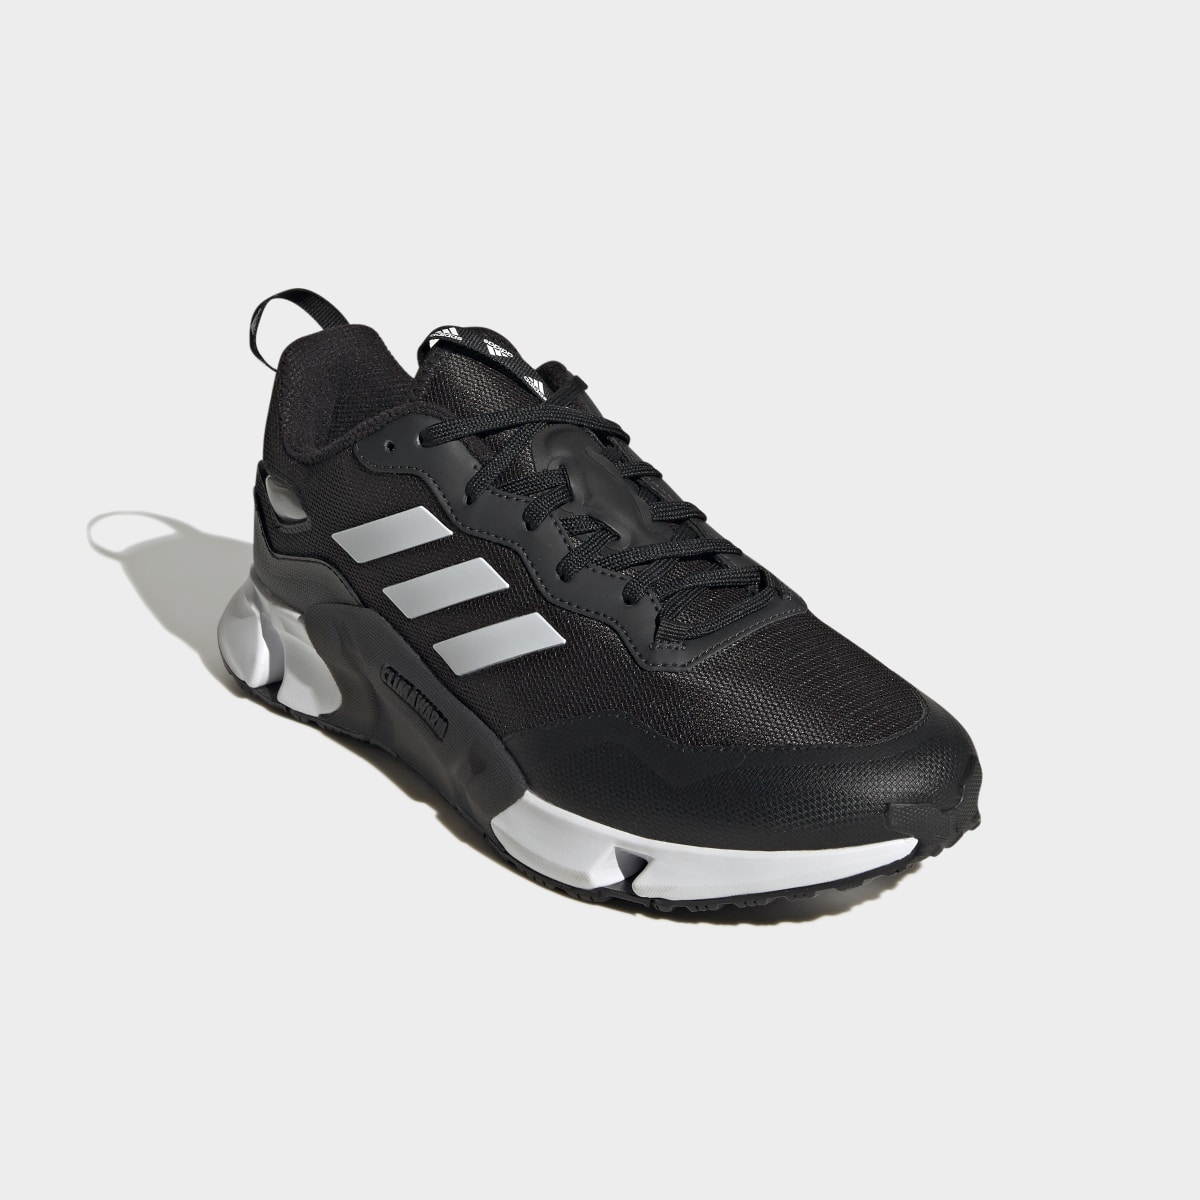 Adidas Climawarm Shoes. 8